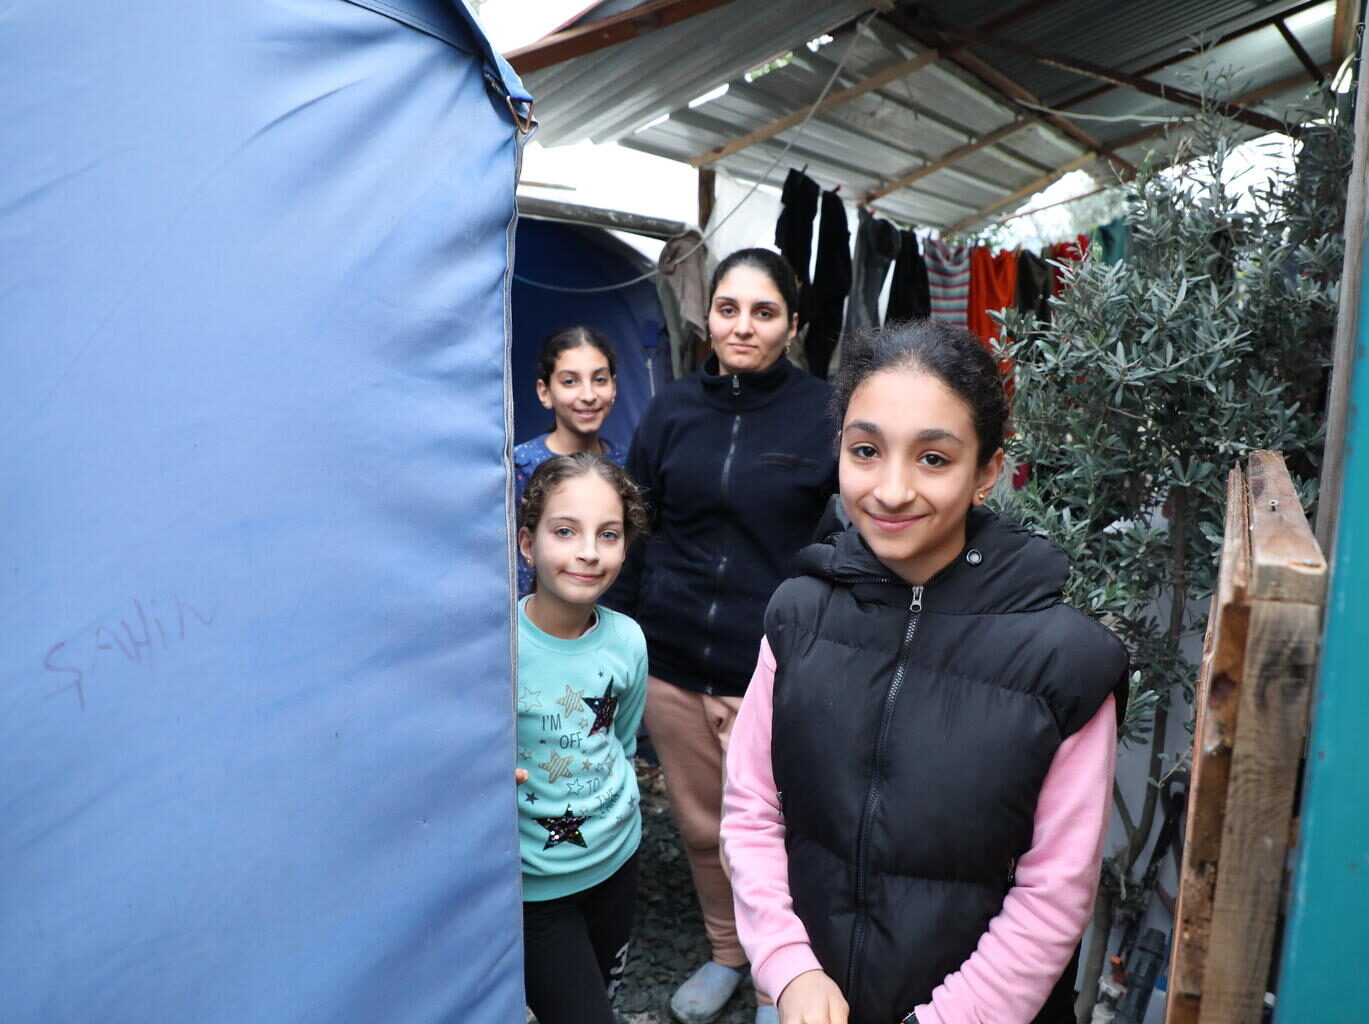 14-year-old Ela stands in the doorway of her temporary accommodation. Her family are in the background.